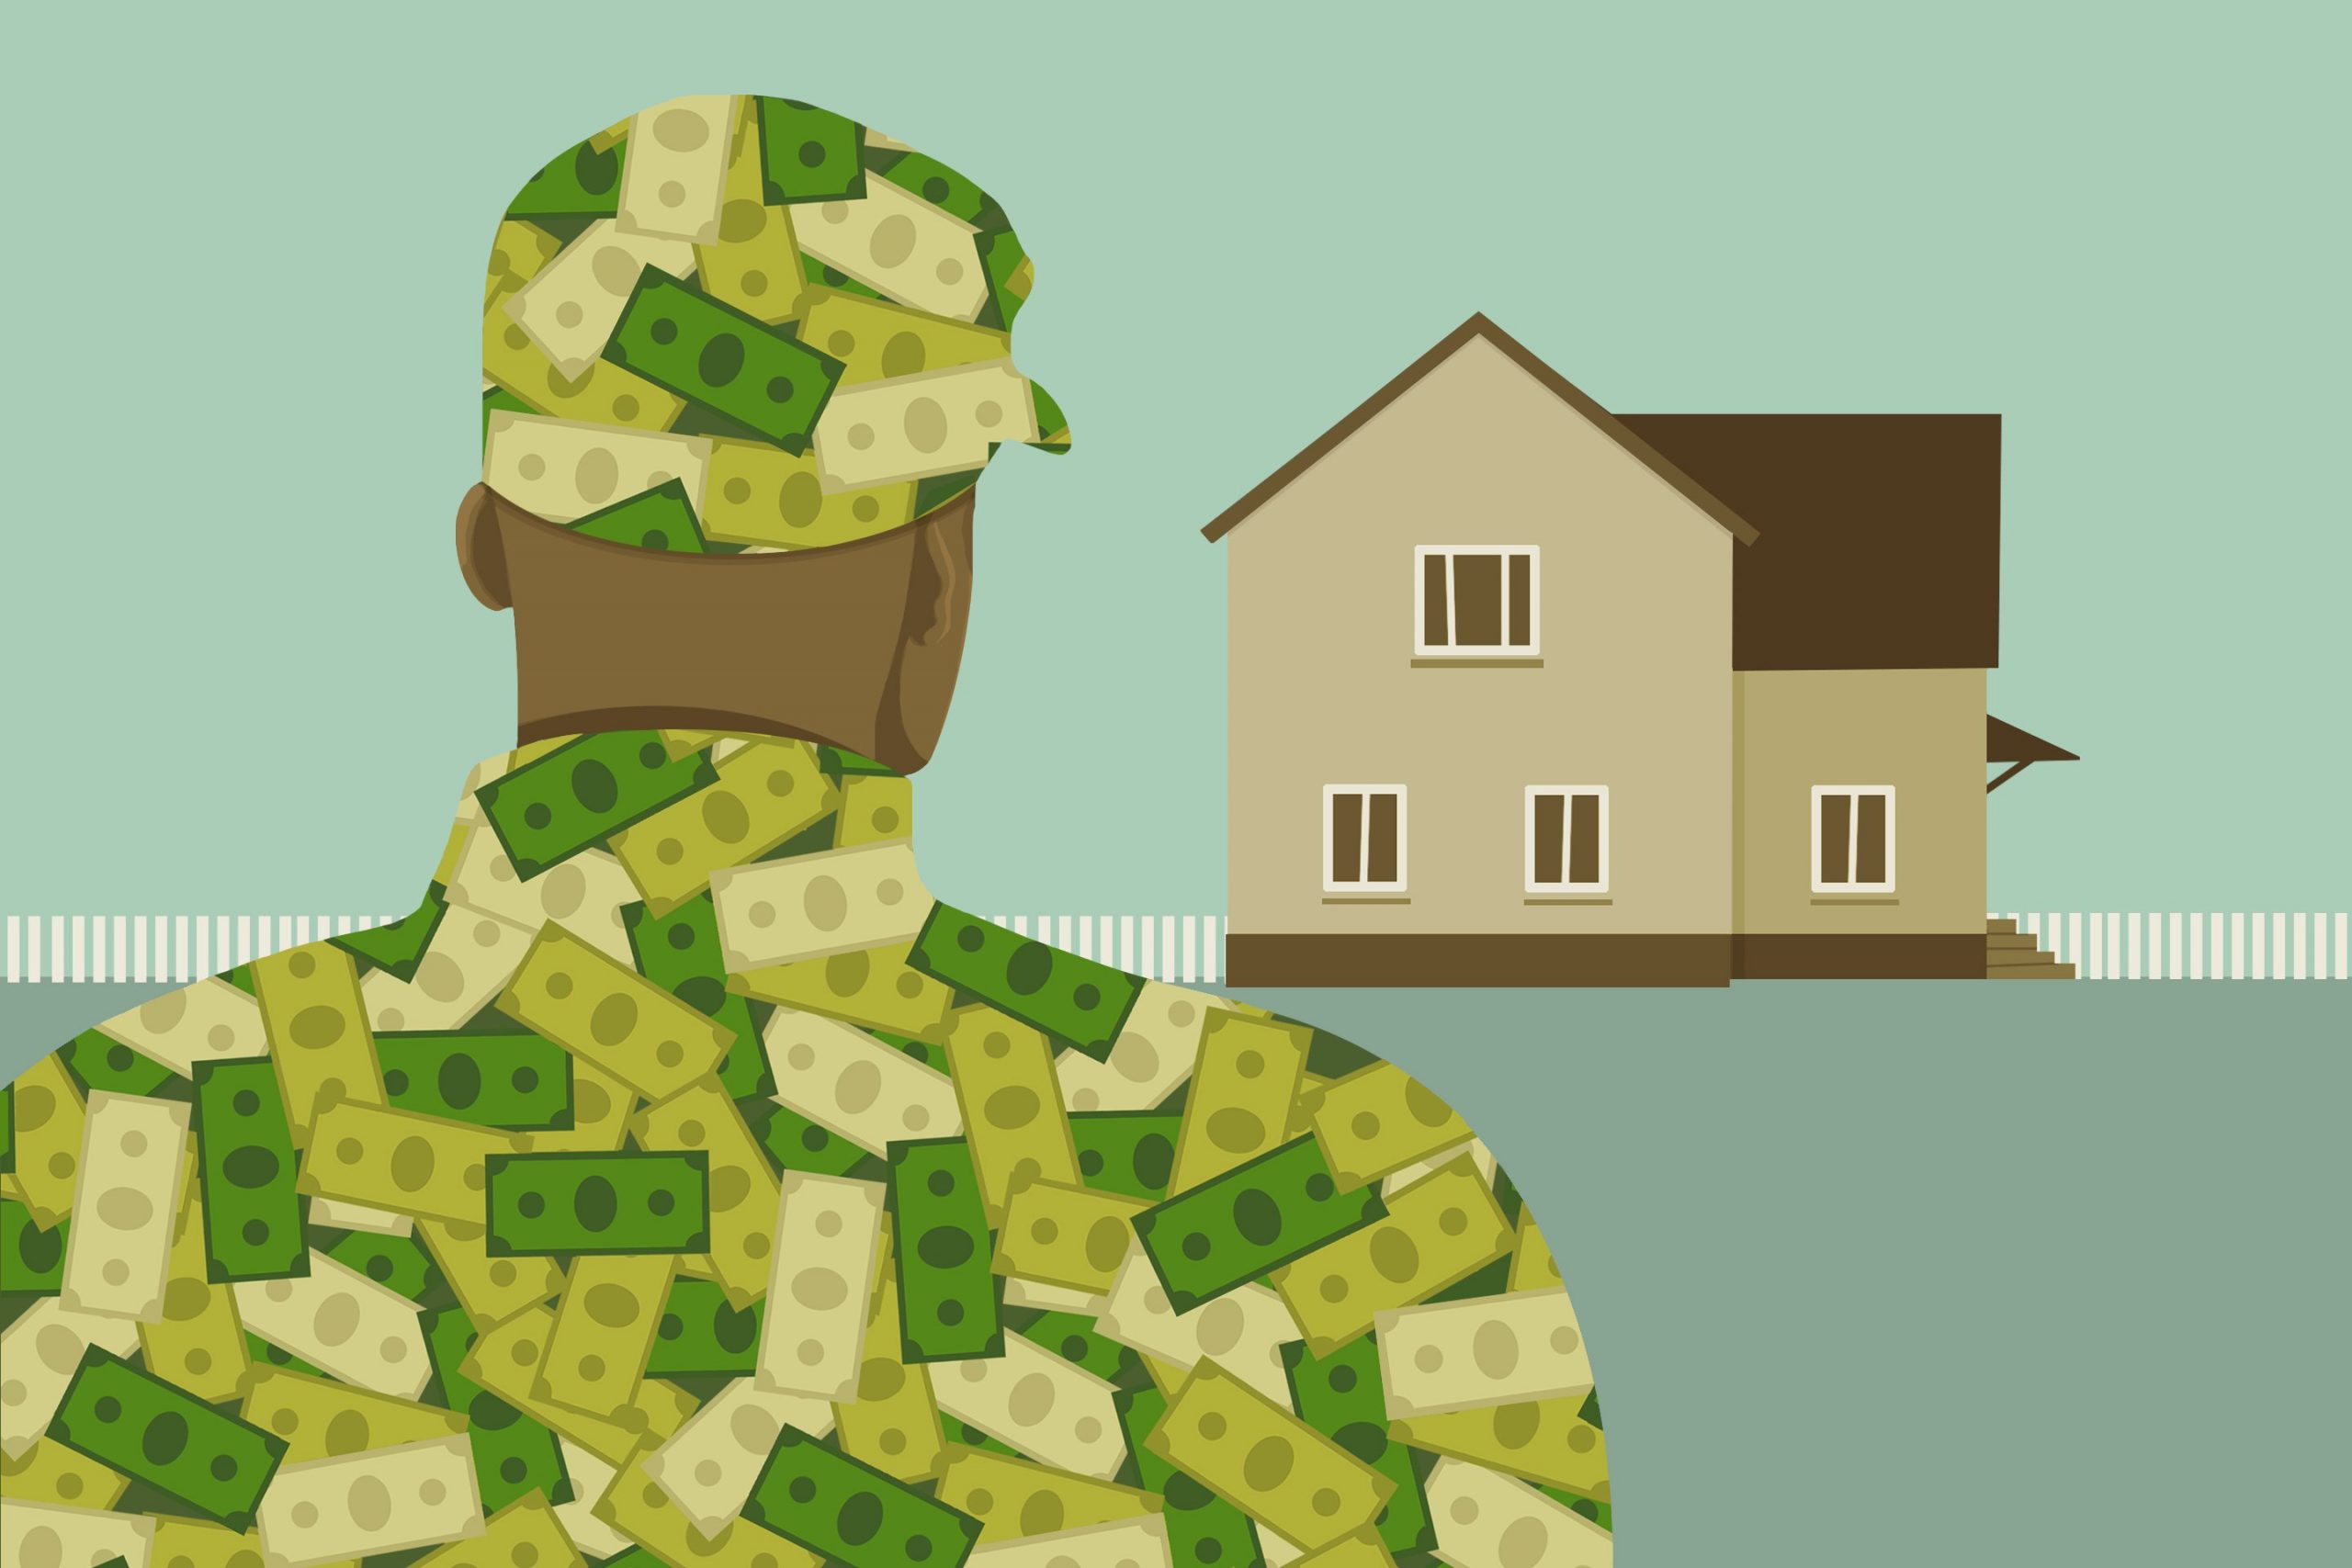 VA Loans Don’t Require Down Payments. Should You Make One Anyway? – Money